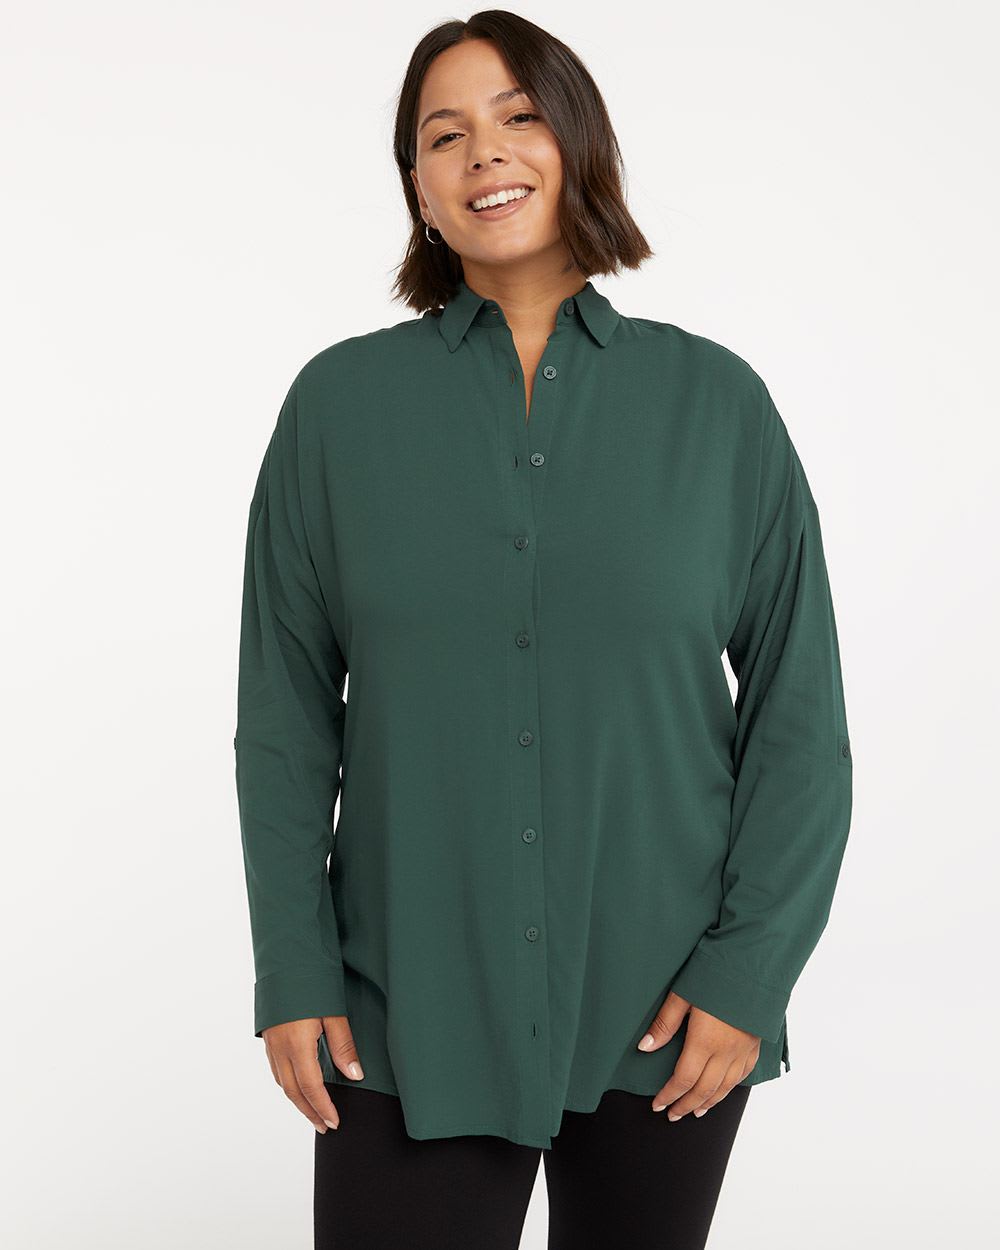 Solid Buttoned Down Tunic with Shirt Collar